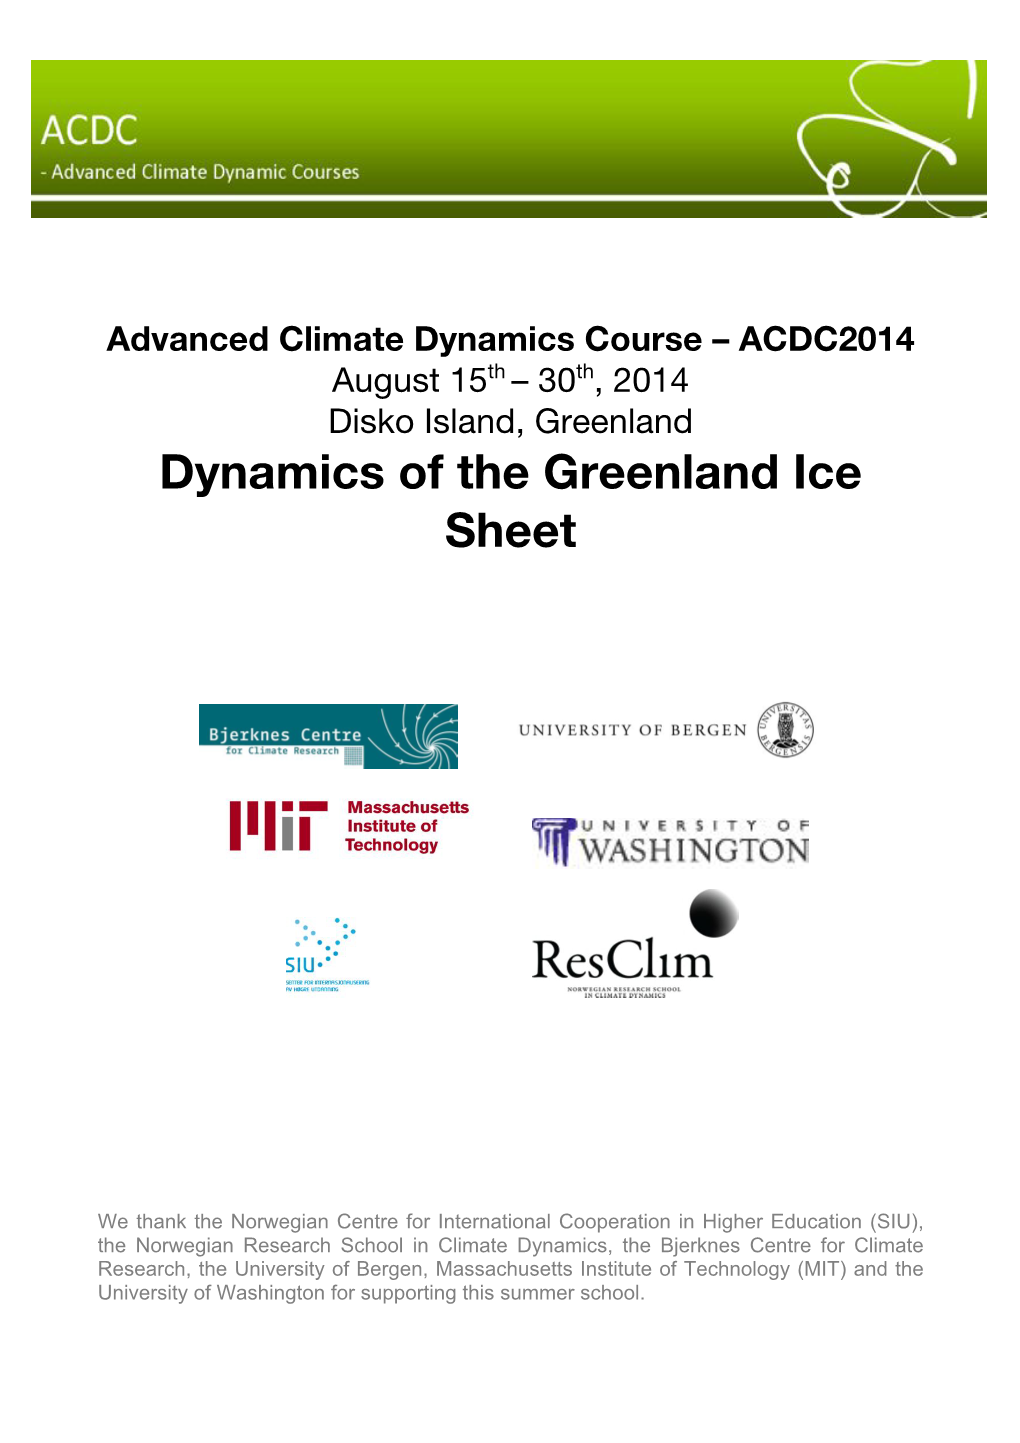 Dynamics of the Greenland Ice Sheet